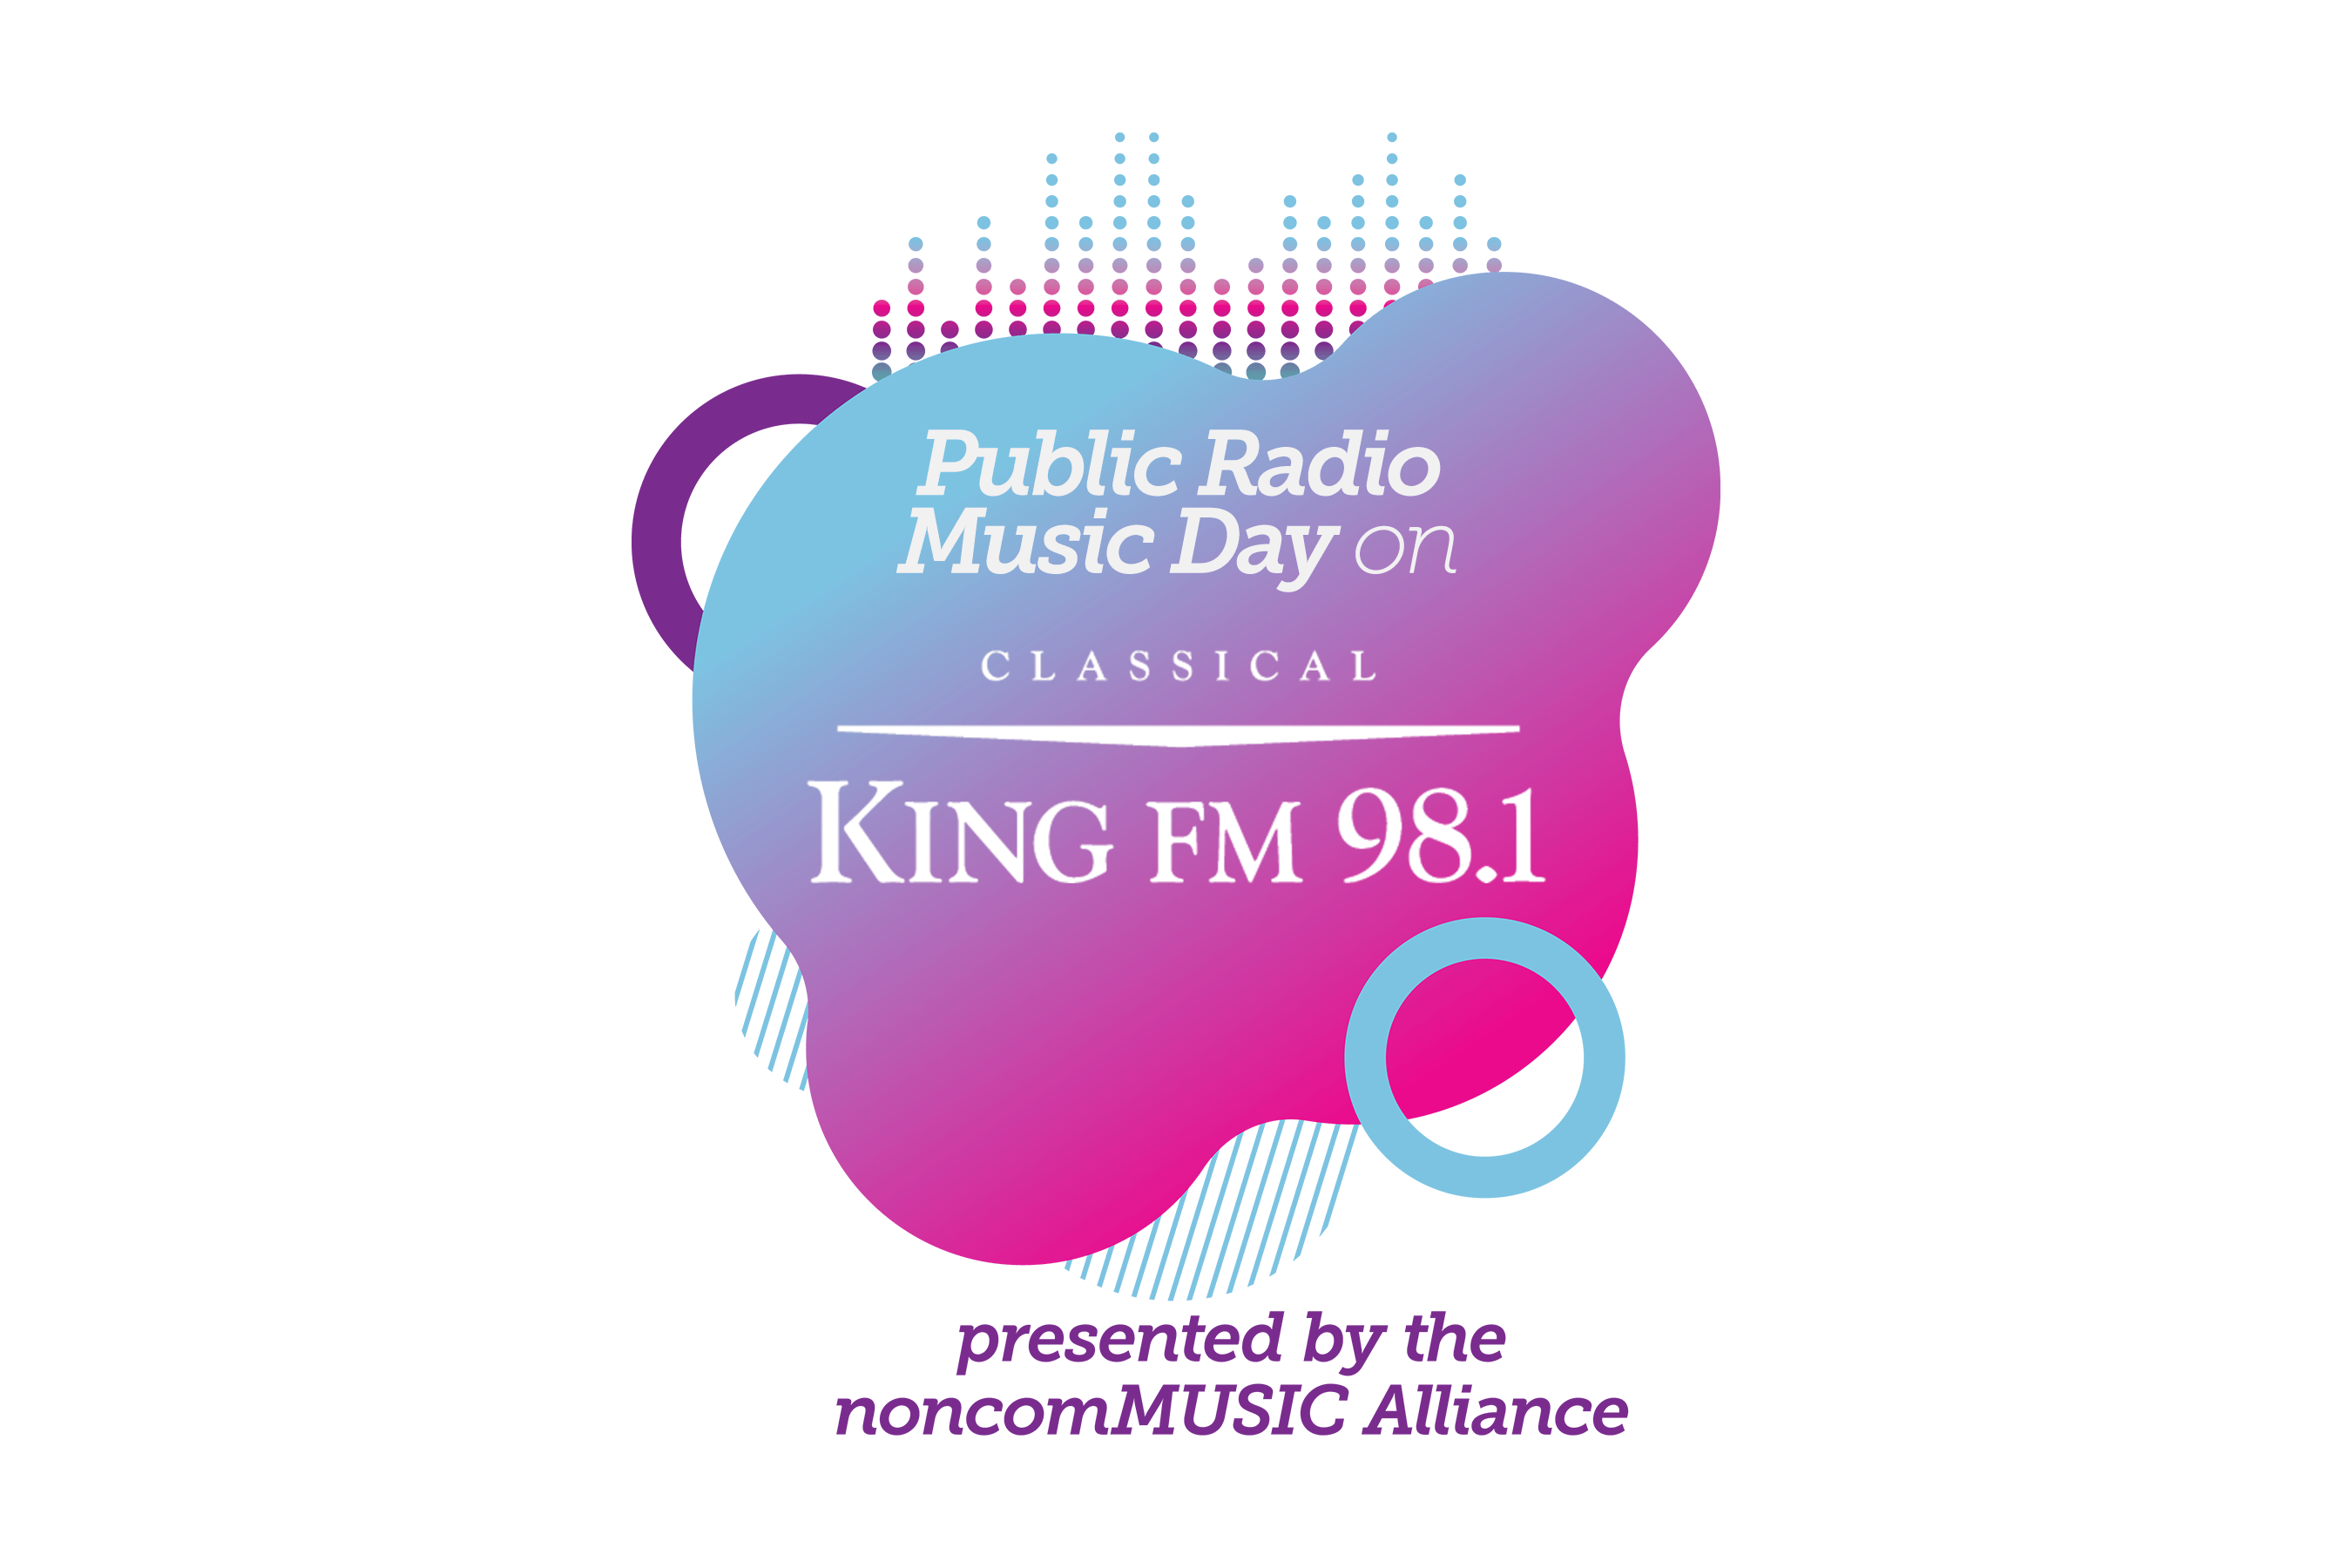 [abstract blue / purple / pink shape] Public Radio Music Day on Classical KING FM 98.1 | presented by the noncomMUSIC Alliance